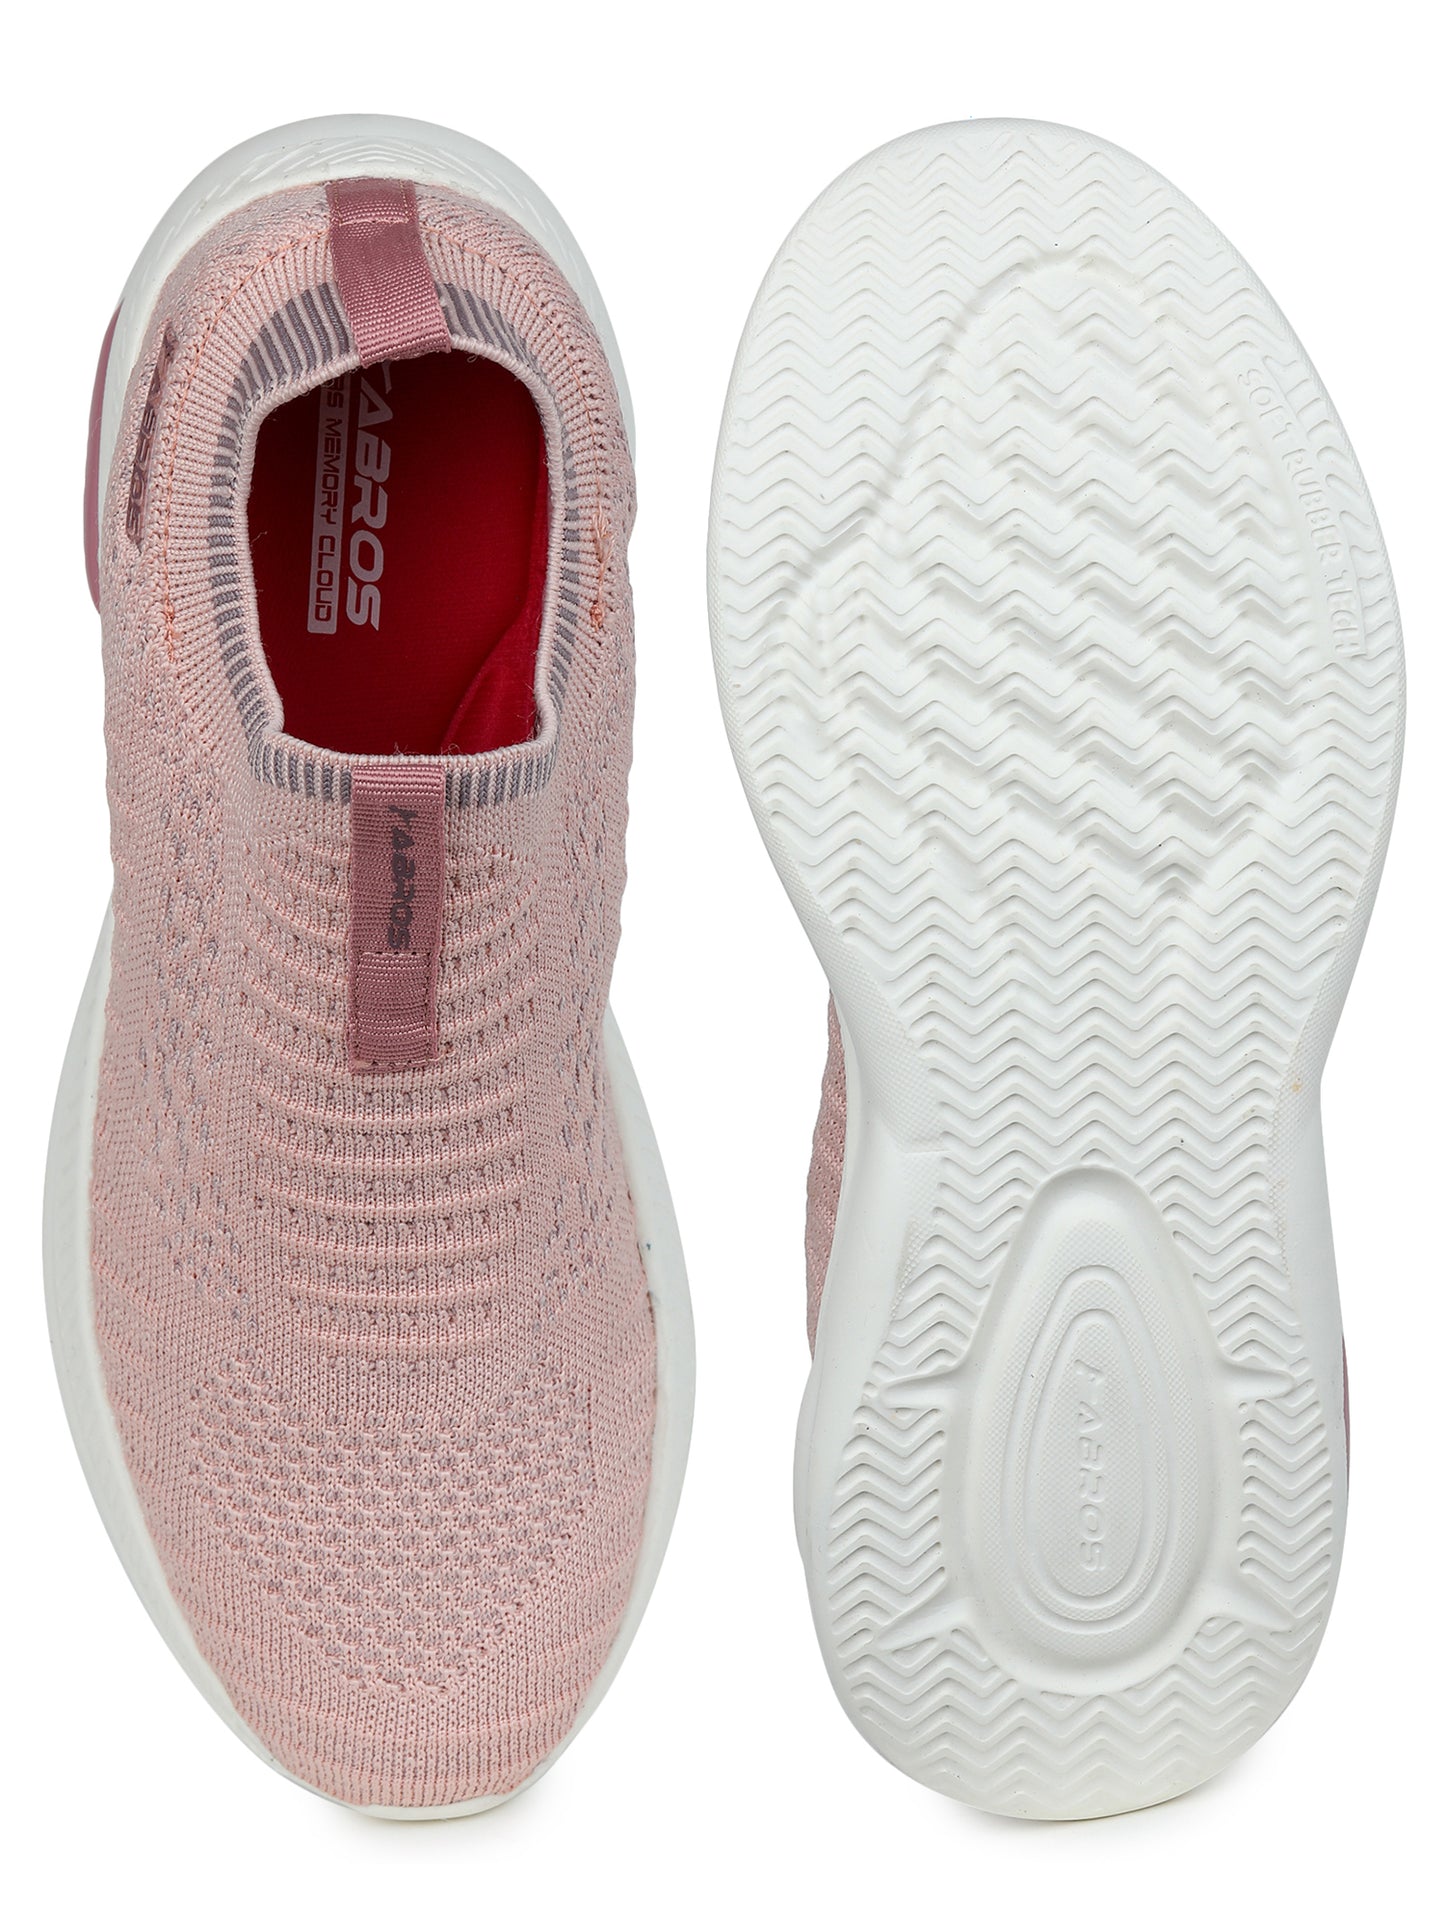 ABROS HARMONY SPORTS SHOES FOR WOMEN